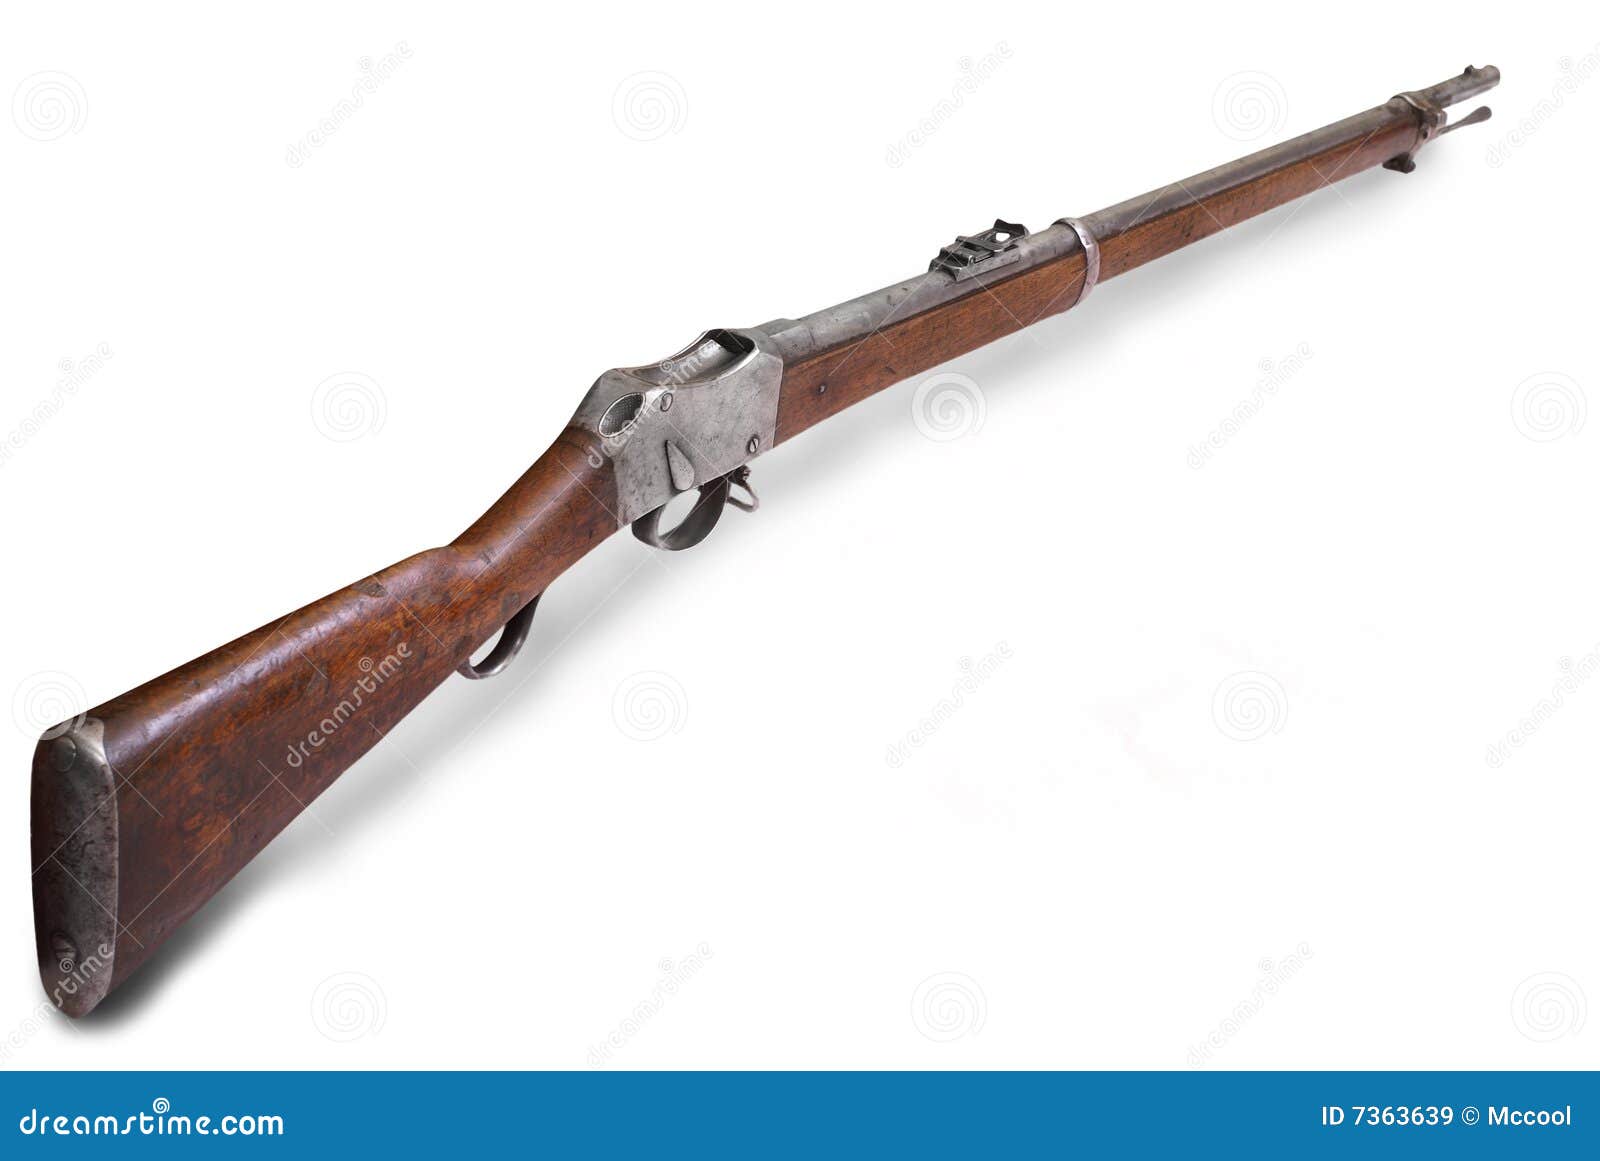 britain infantry rifle of 19th century